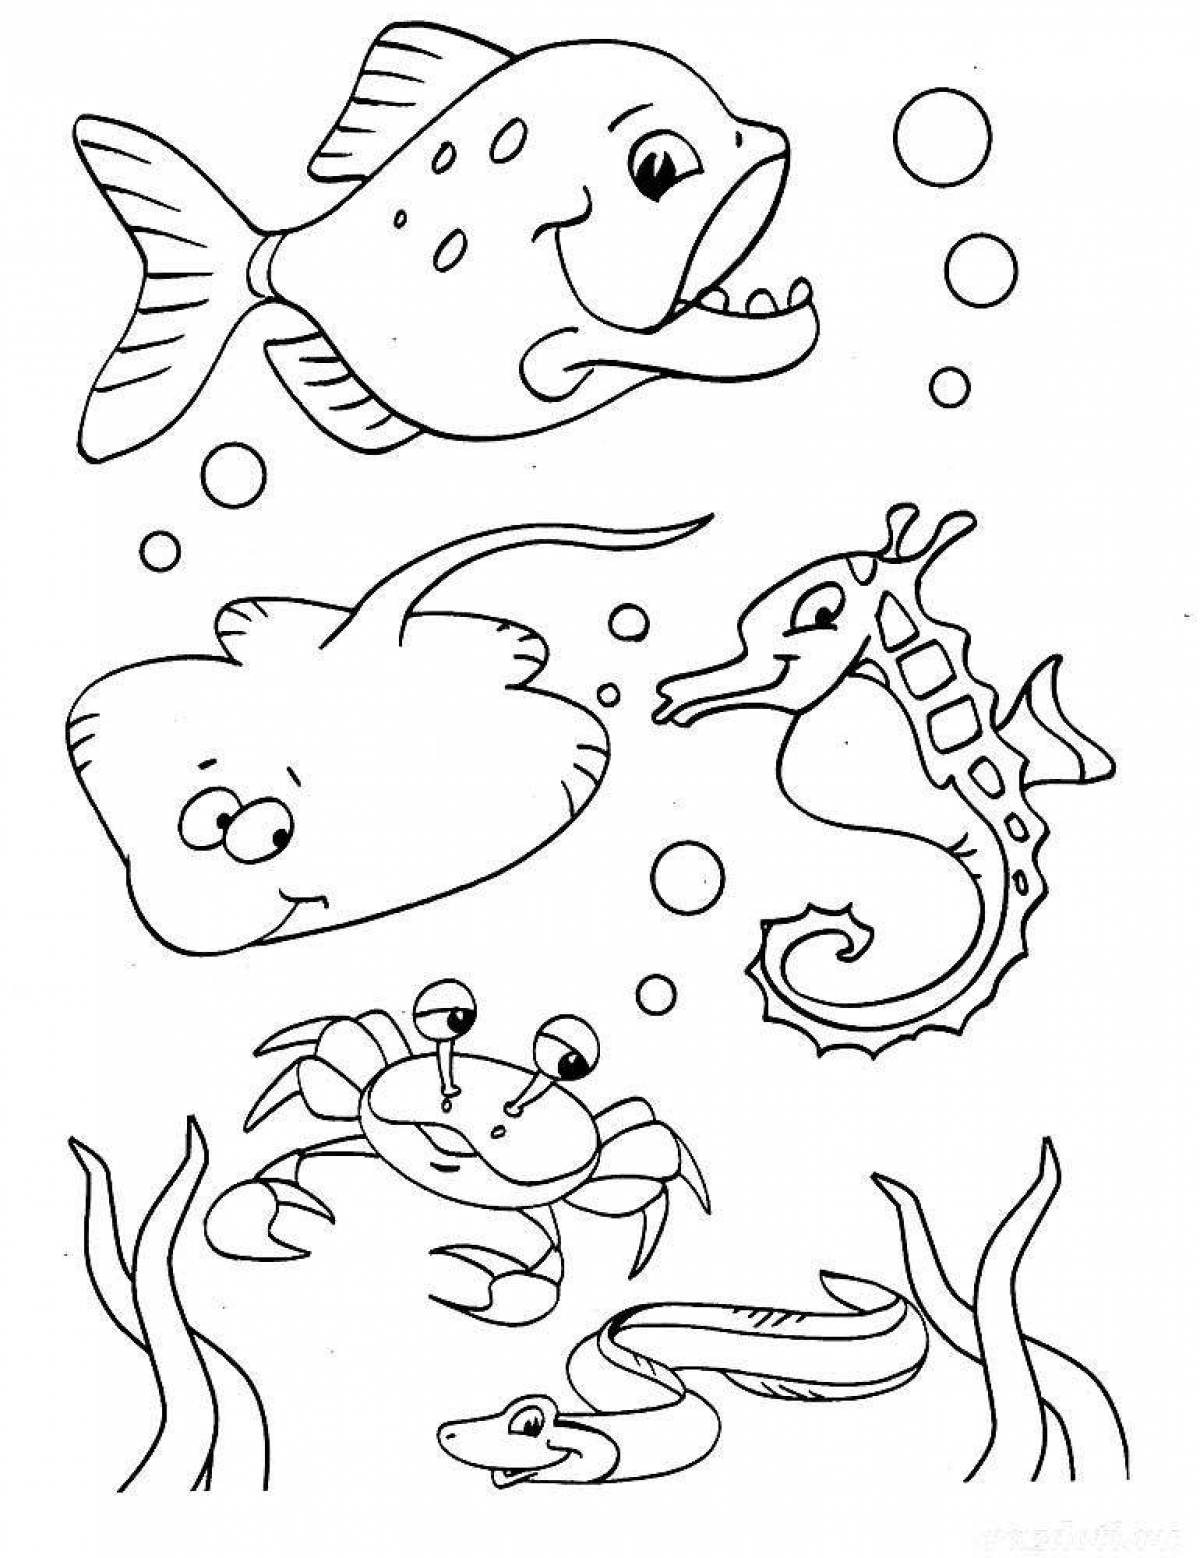 Glorious sea life coloring book for 6-7 year olds